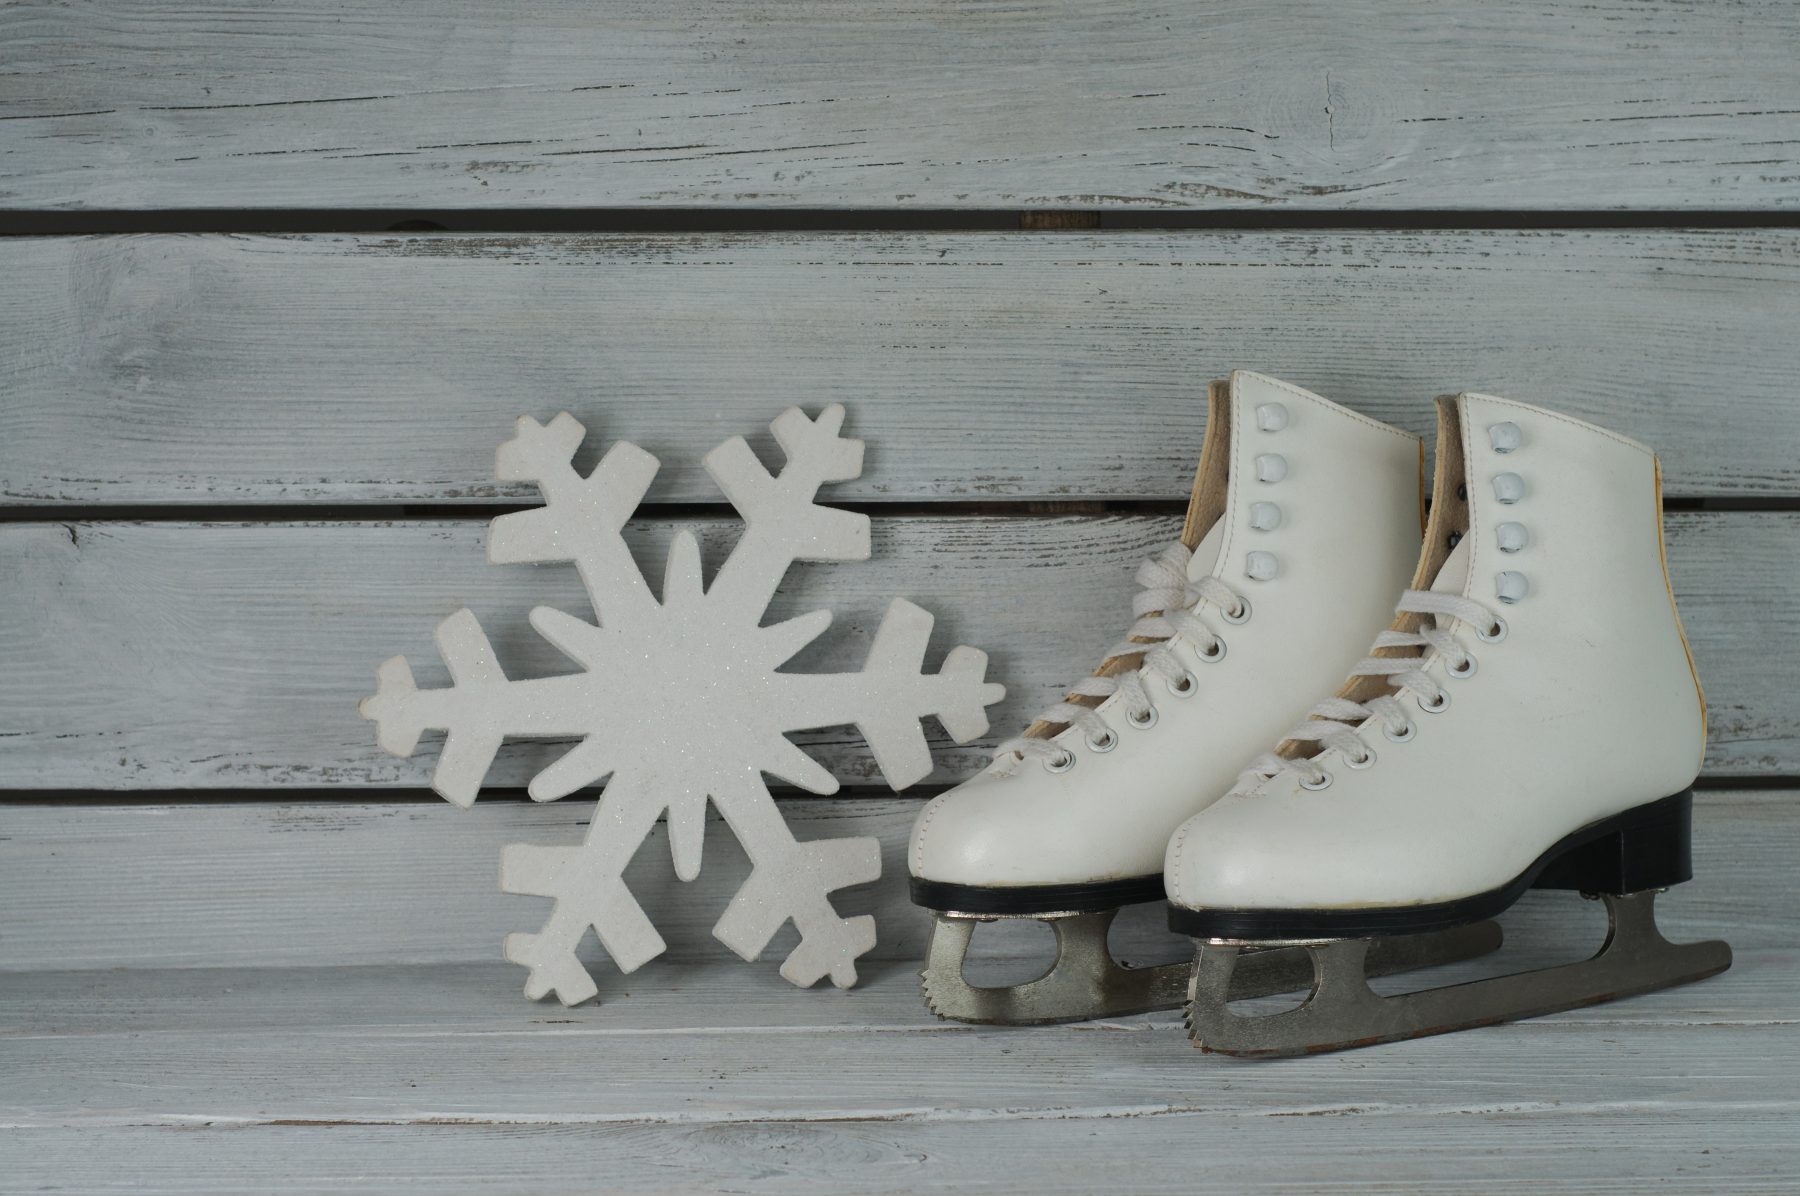 Ice Skating, It’s Coming to our Community!!!